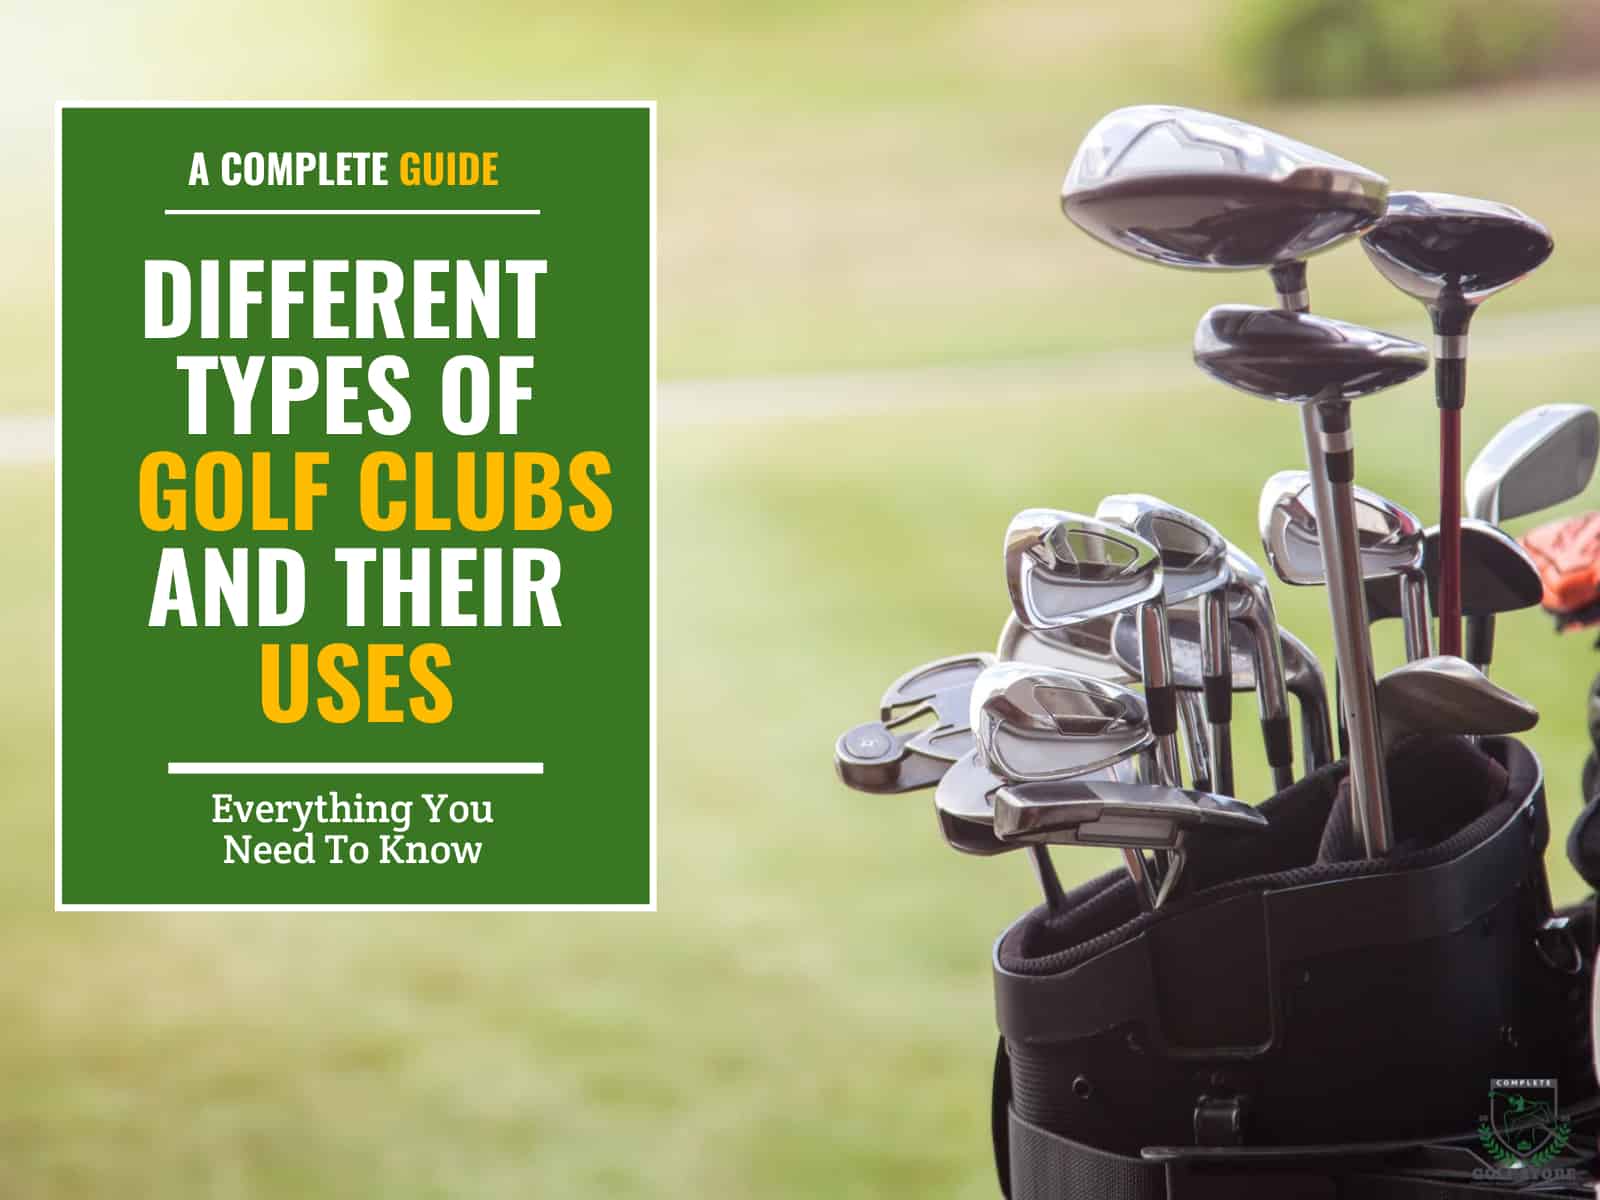 Different types of golf clubs and their uses